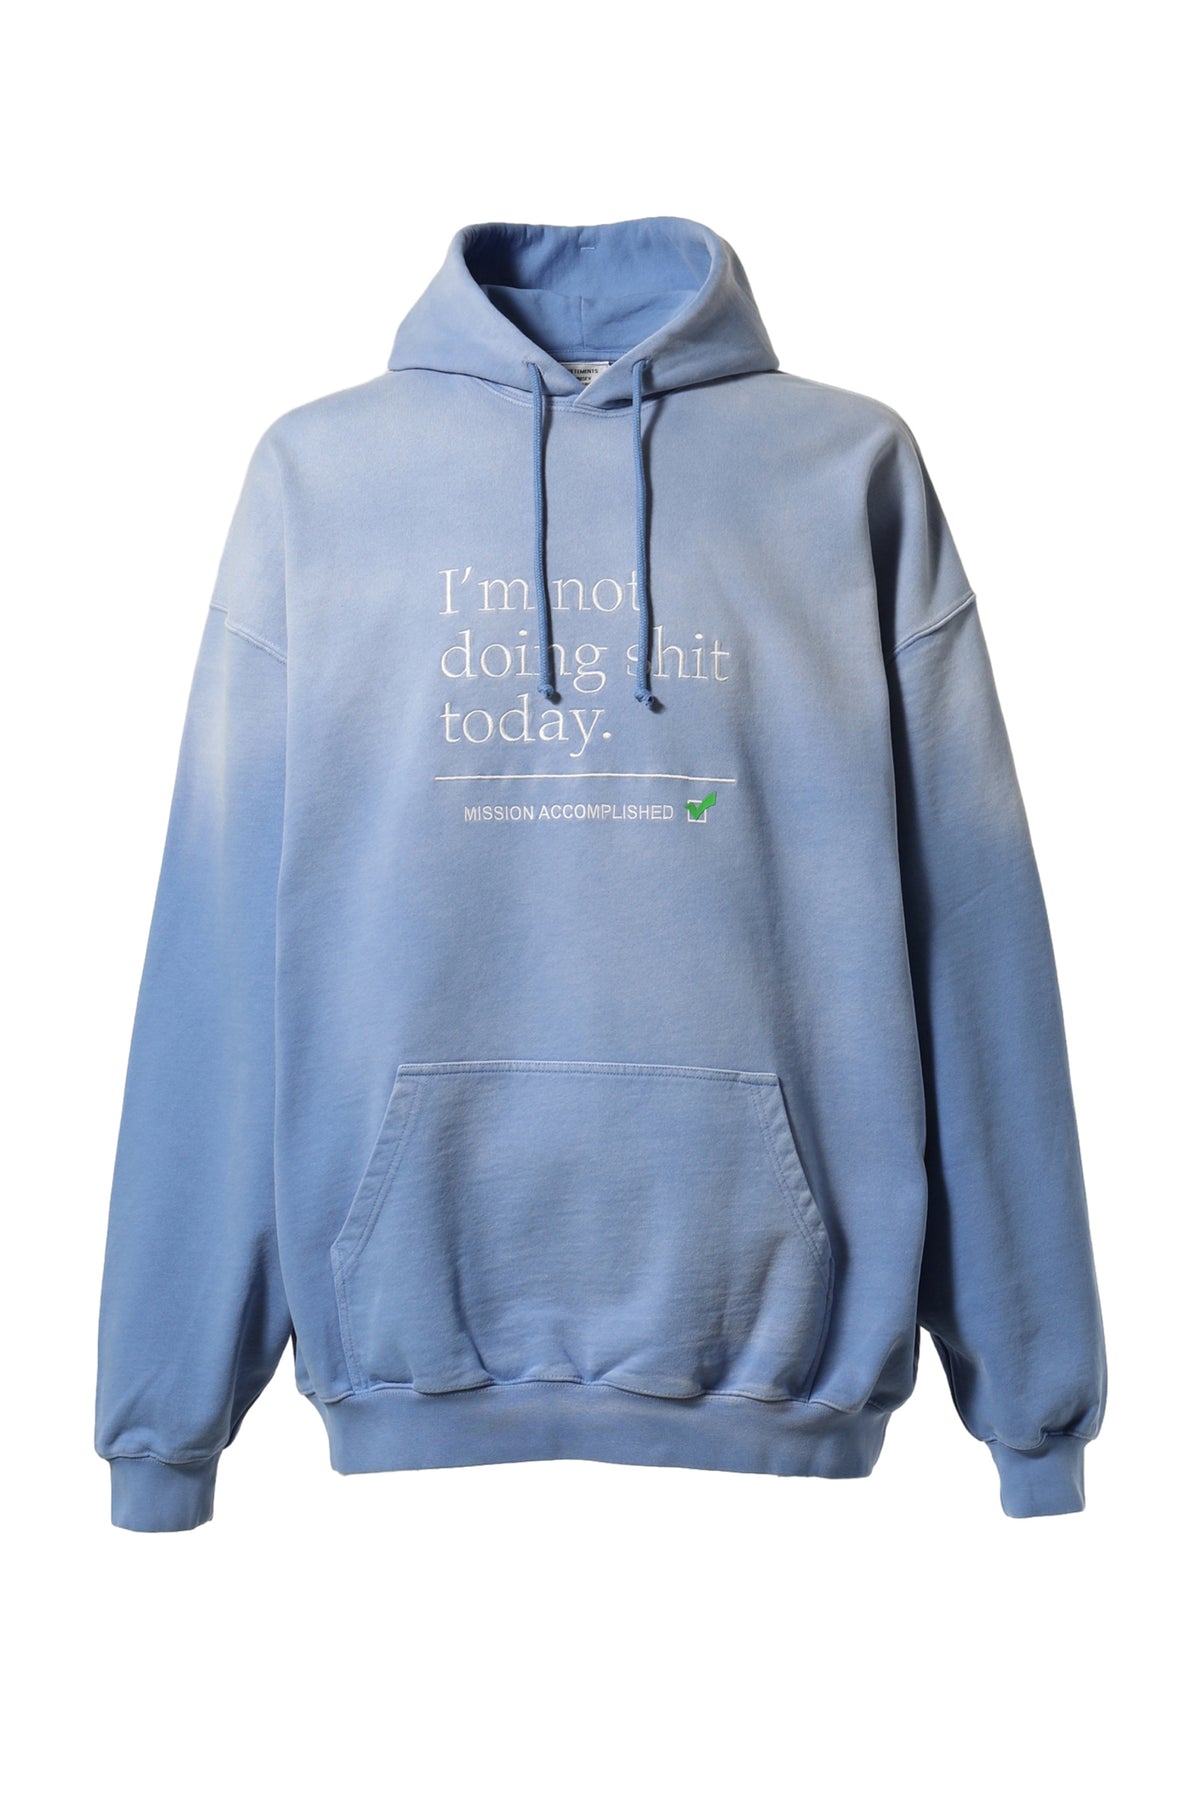 NOT DOING SHIT TODAY HOODIE / WASHED BLU